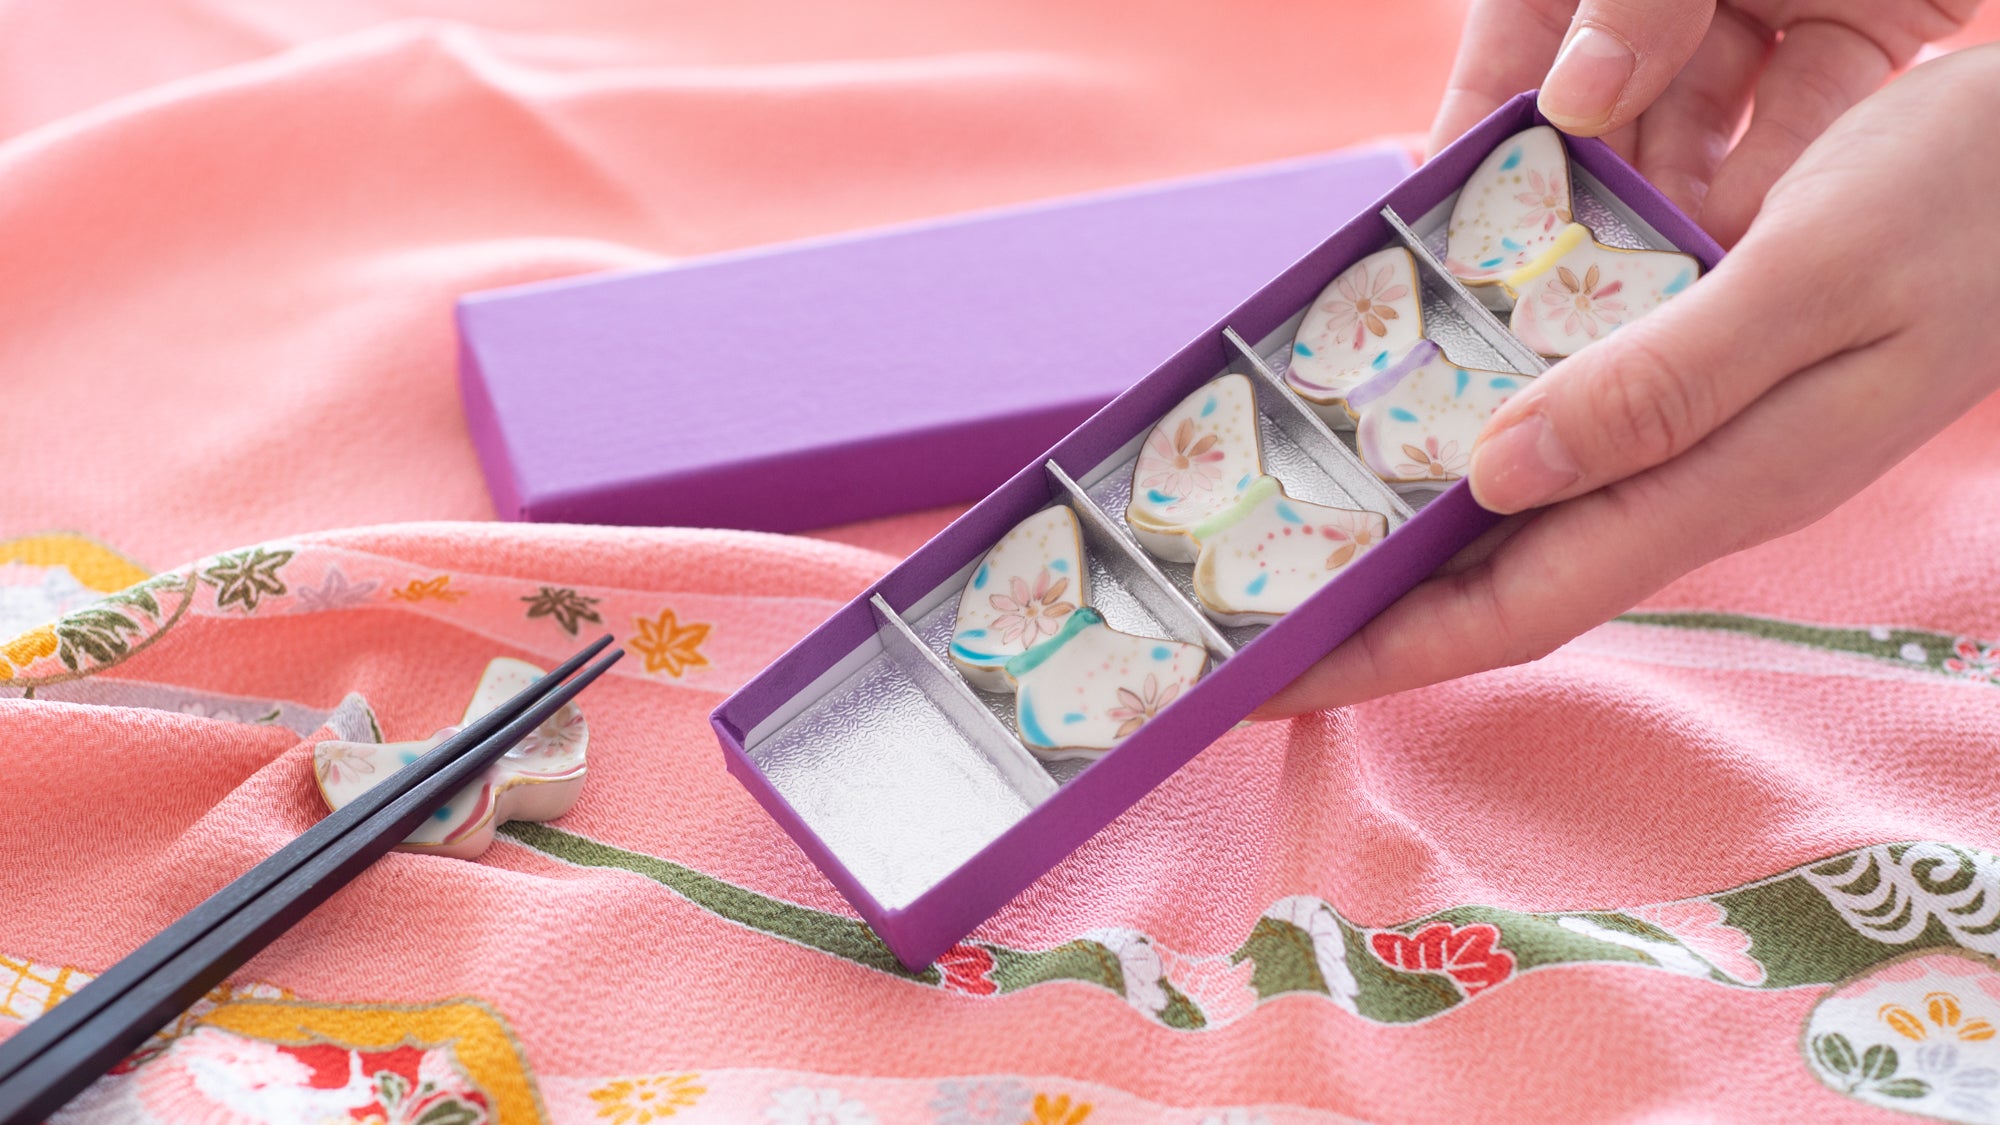 Japanese Choptick Rest Sets: Sending a Dainty Gift of Japanese Charm